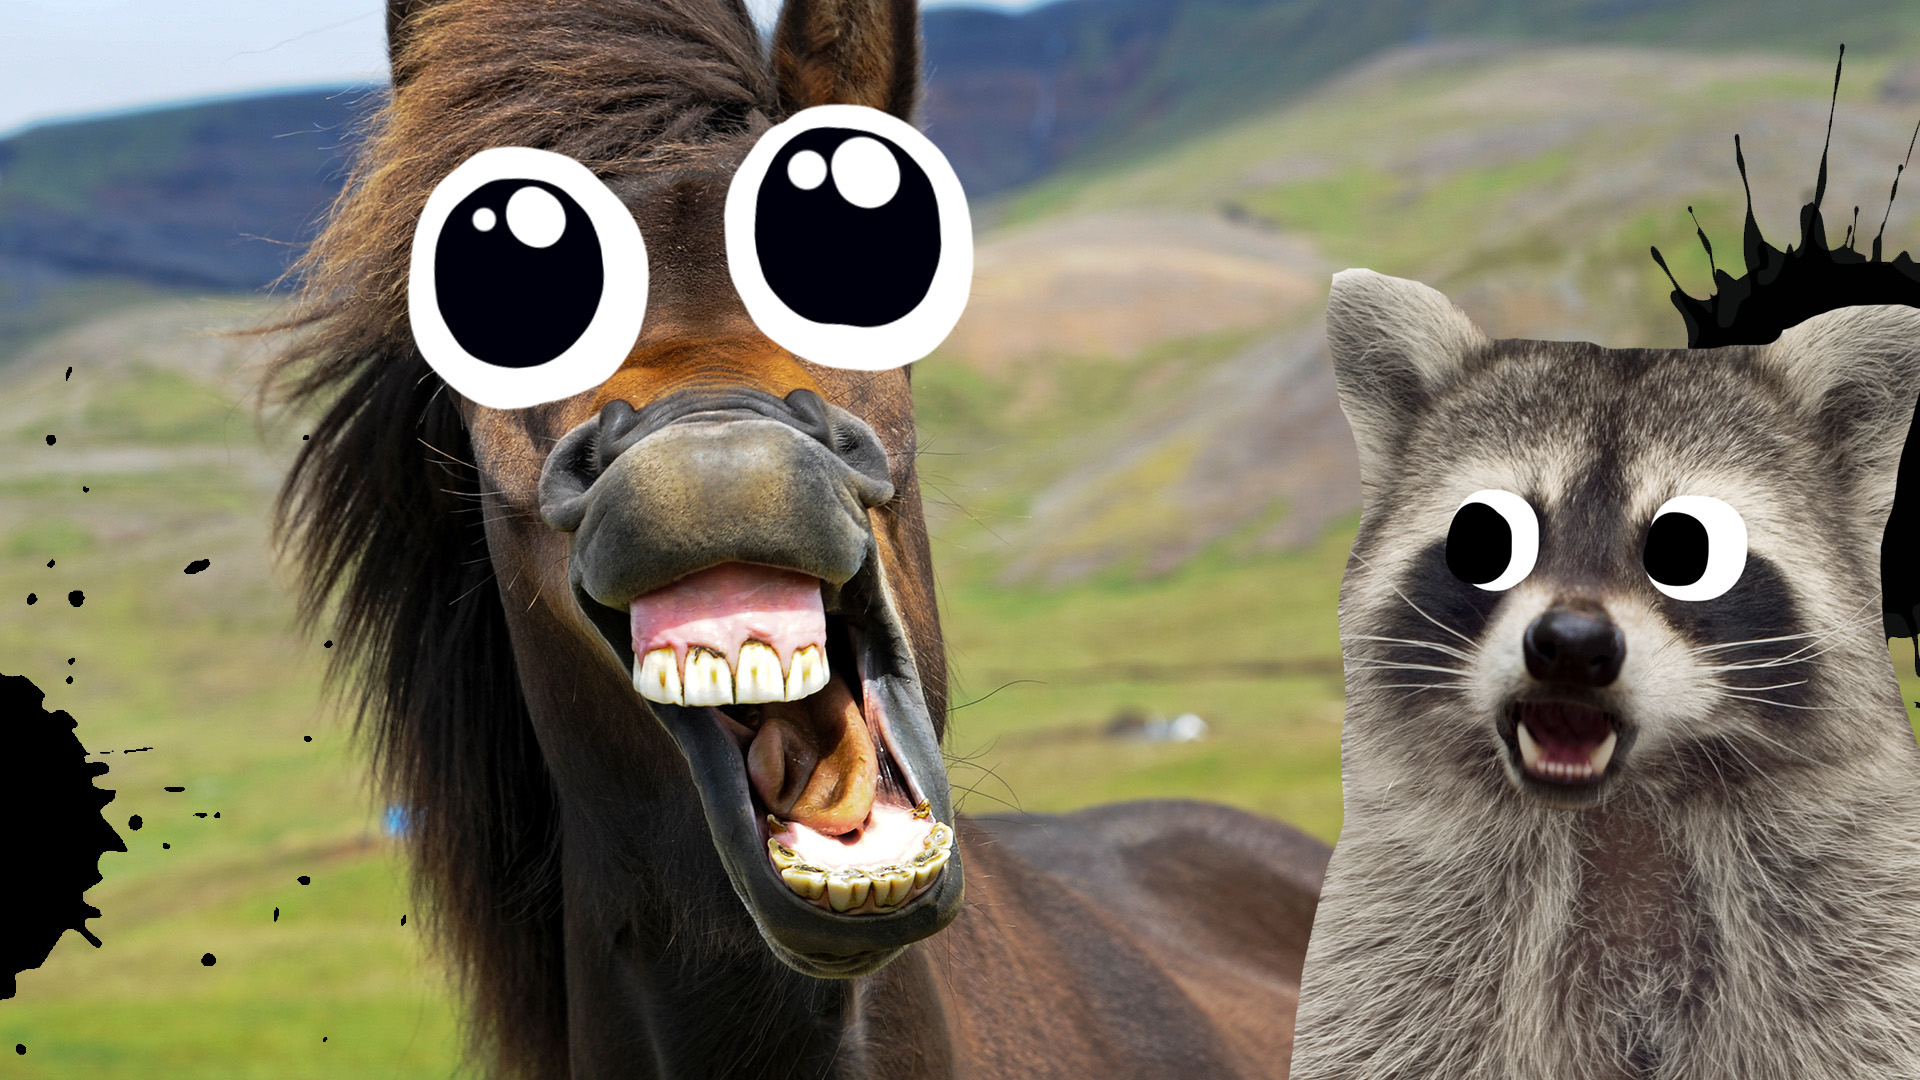 A laughing horse and a racoon 